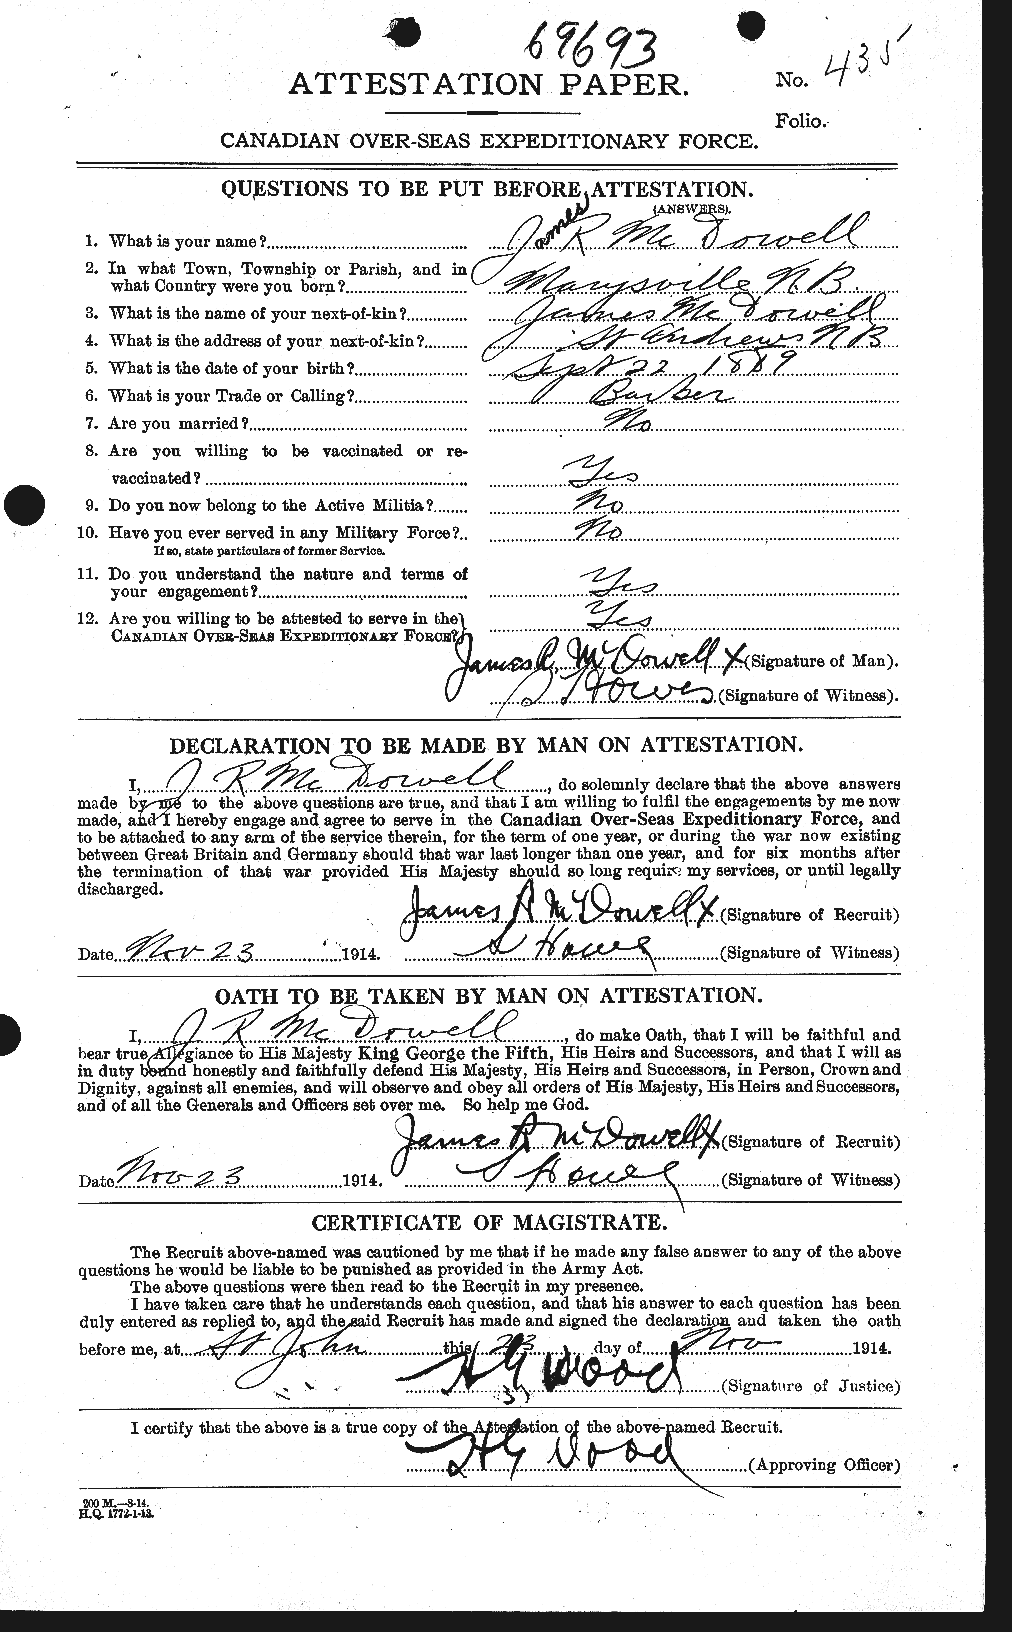 Personnel Records of the First World War - CEF 520649a